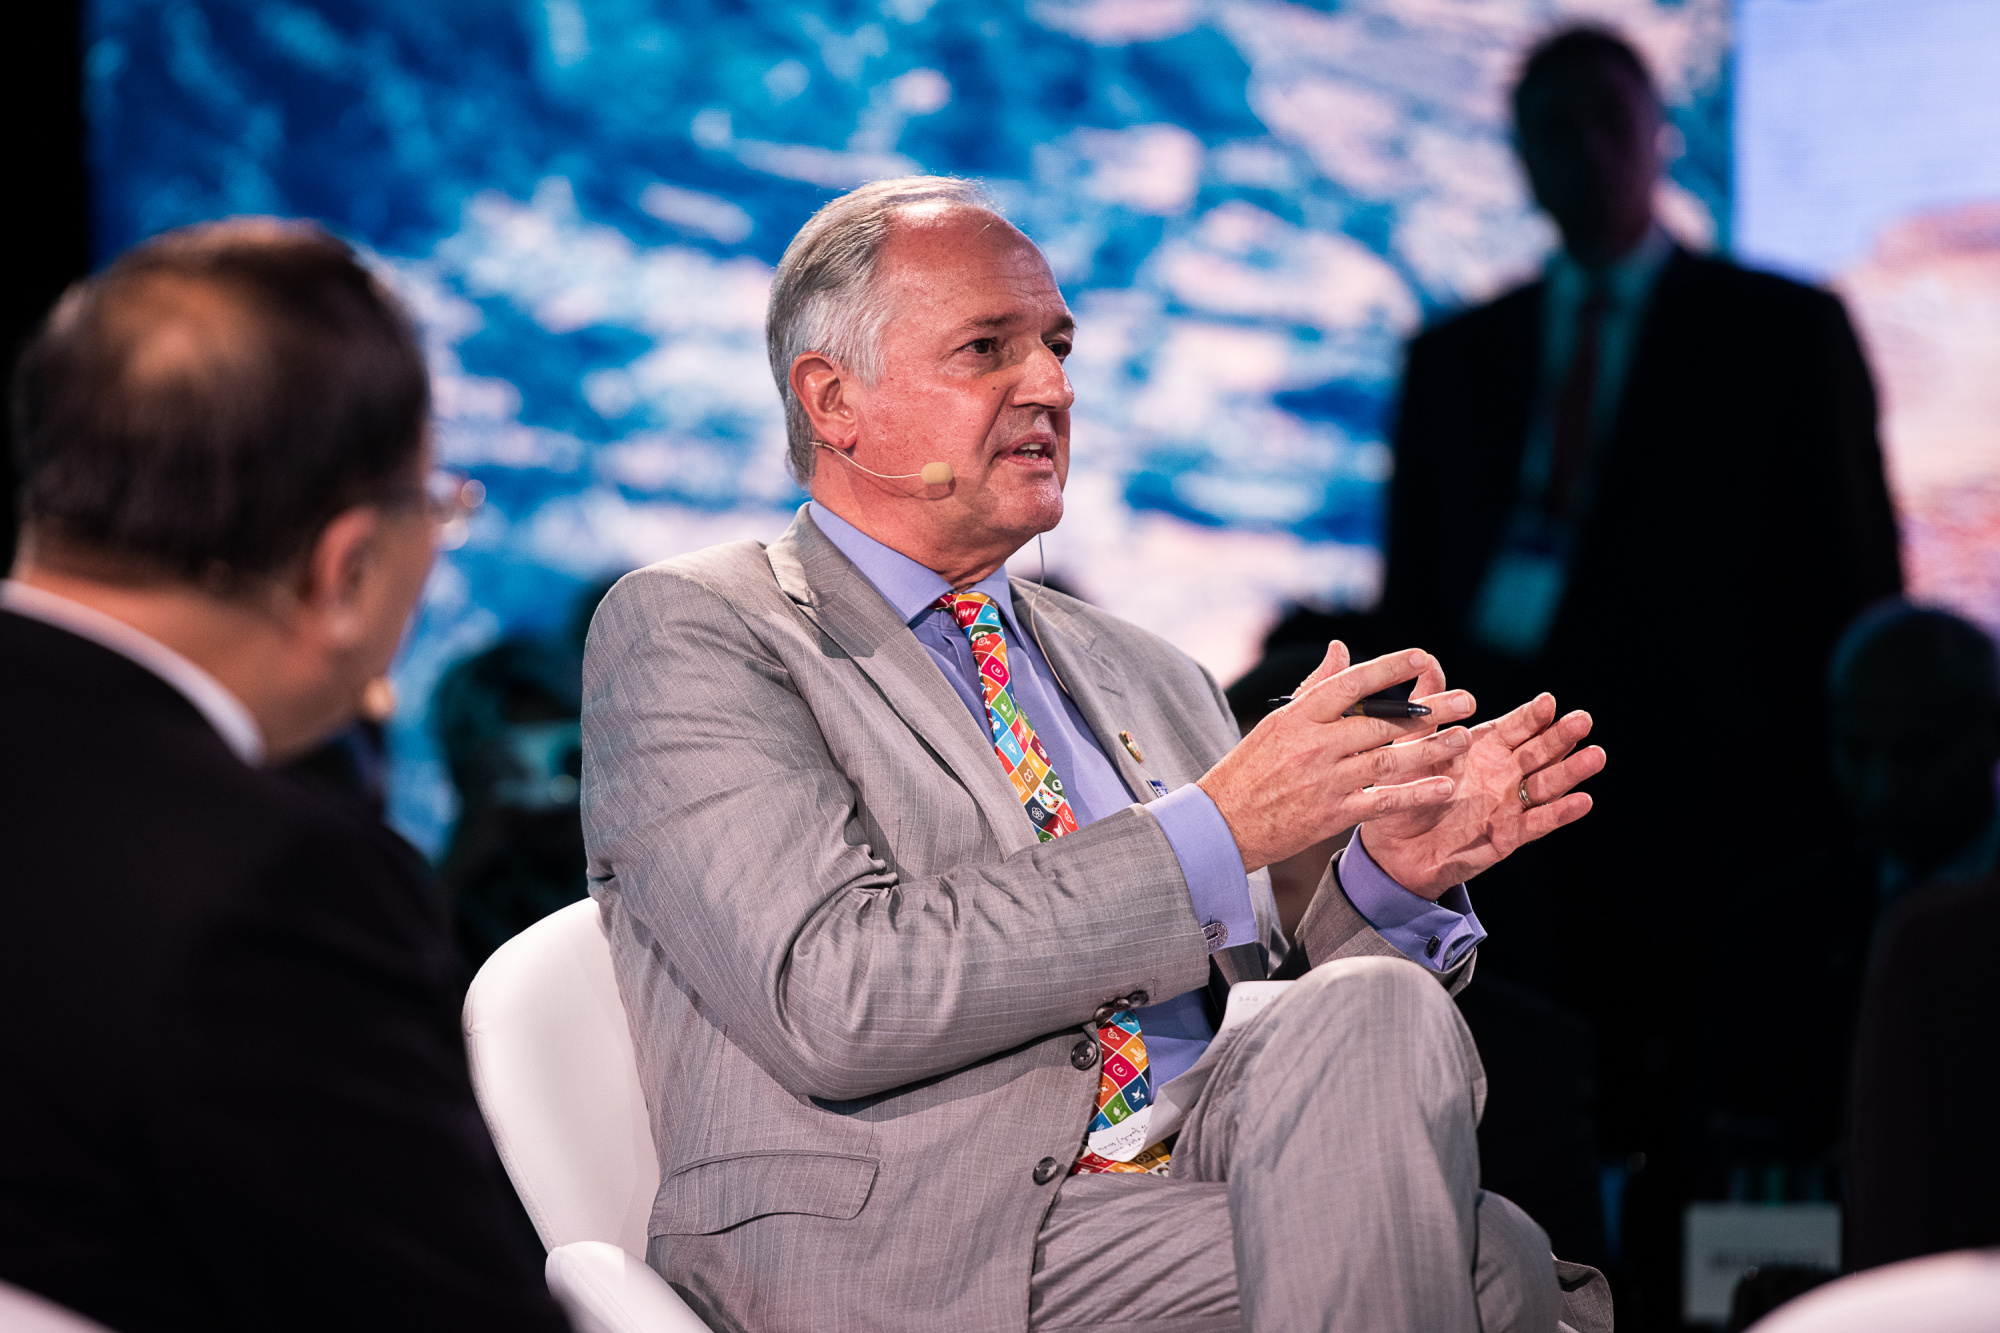 Paul Polman at the One Planet Summit in New York on Sept. 26.